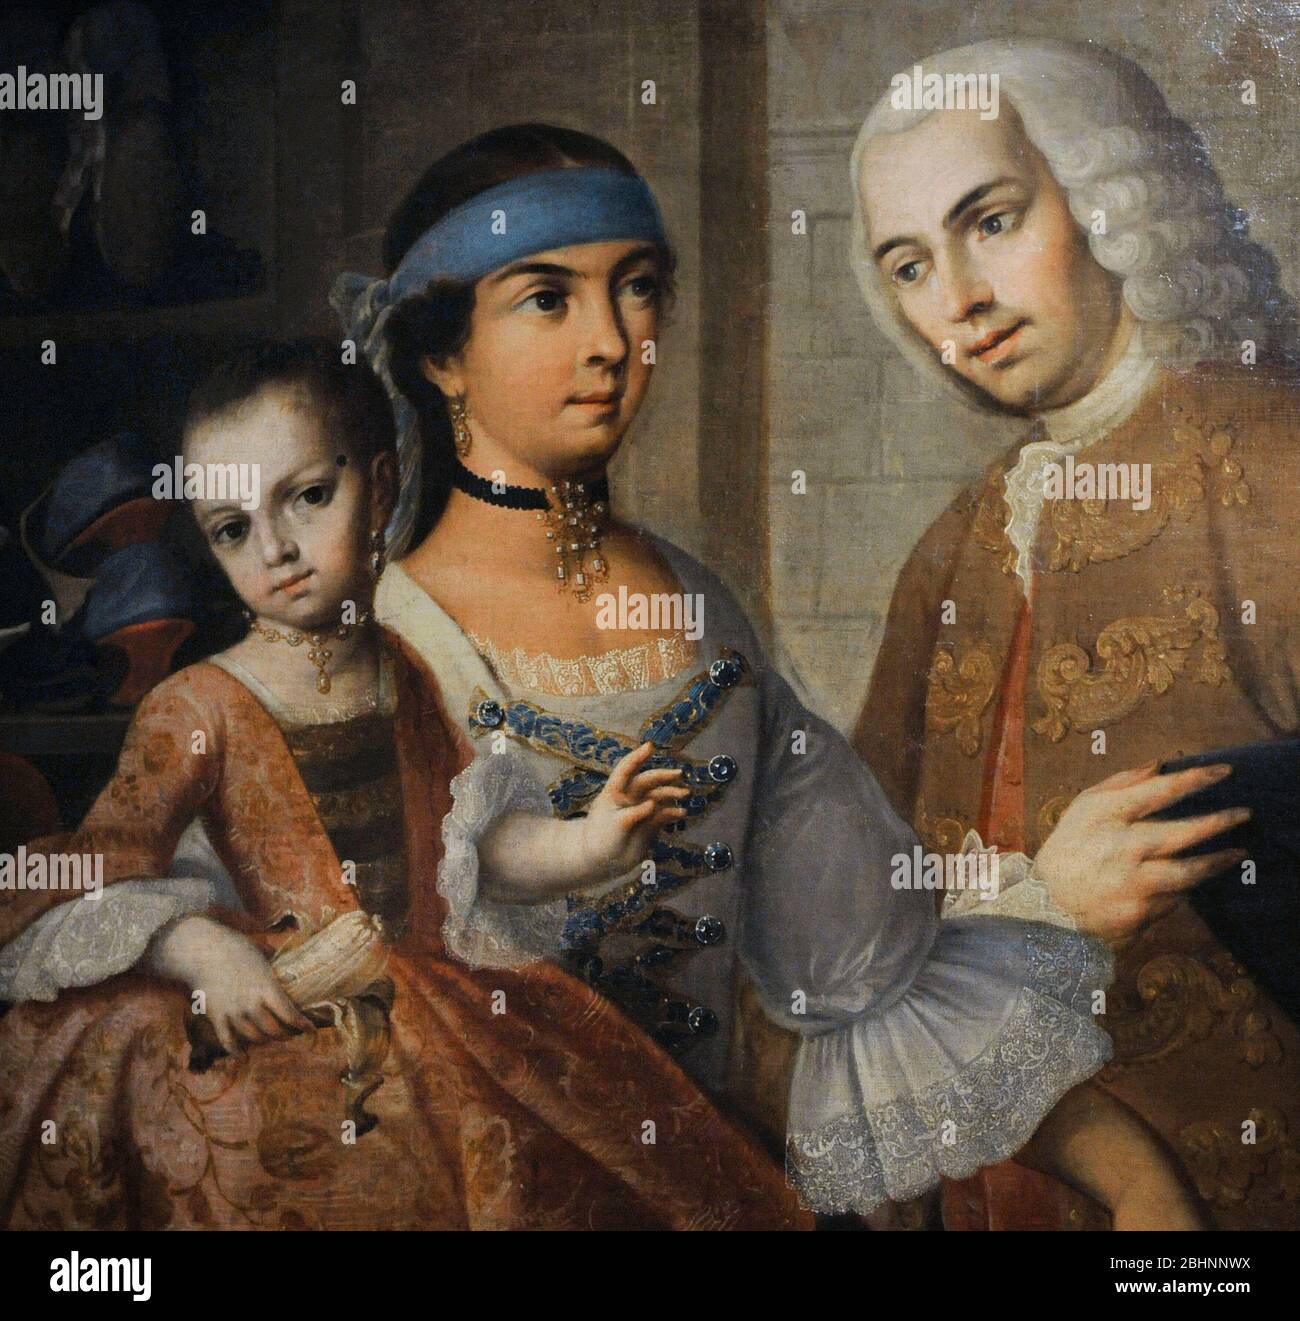 Casta painting. From Spaniard (right) and Mestiza (middle), Castiza (child), 1763. Detail. Miguel Cabrera (1695-1768). Painter of New Spain. Baroque style. Viceroyalty of New Spain. Mexico. Original Tittle: De español y mestiza, castiza. North America. Oil on canvas. Museum of the Americas. Madrid, Spain. Stock Photo